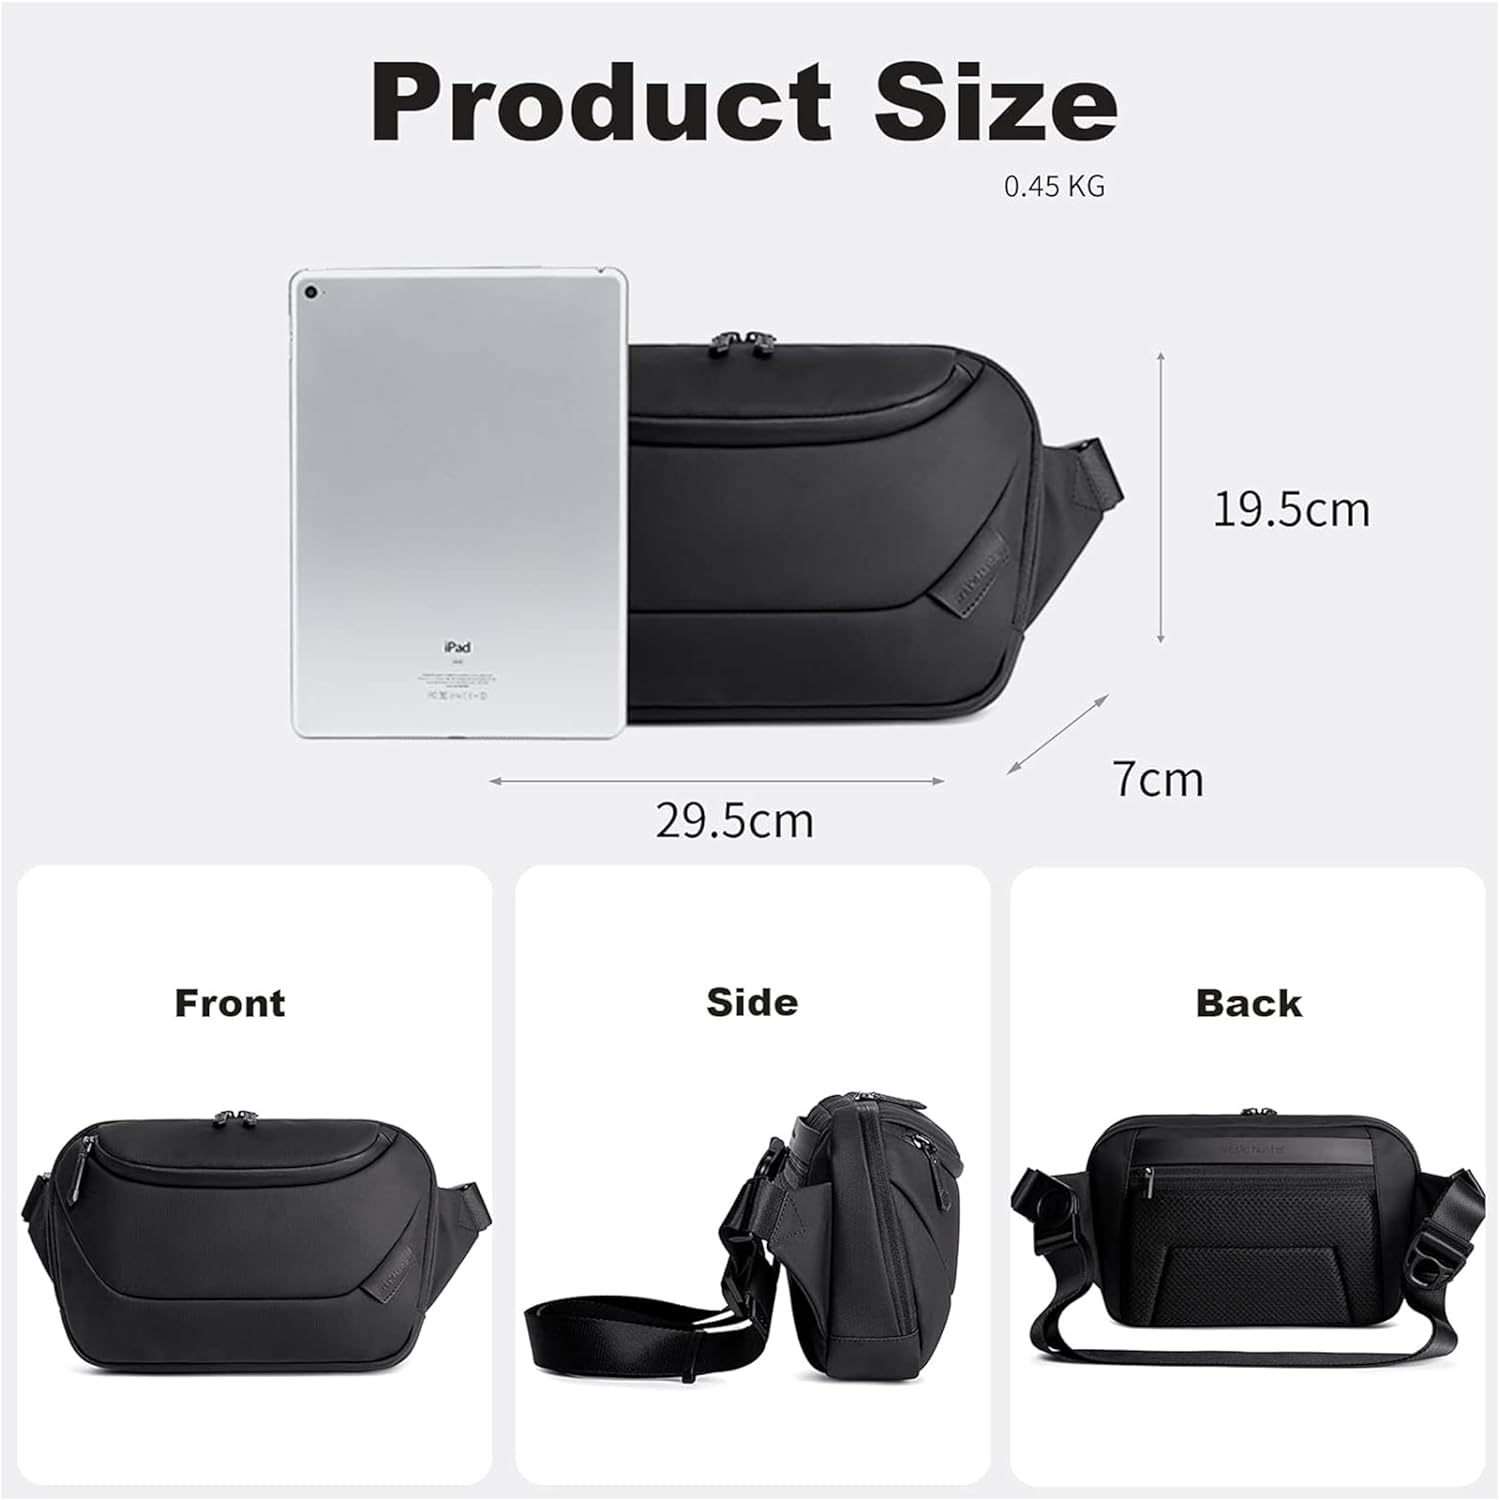 Arctic Hunter Stylish Crossbody Bag Anti-Theft Water Repellent Chest Bag for Men Women on Shopping Travel Office Hiking, Y00561